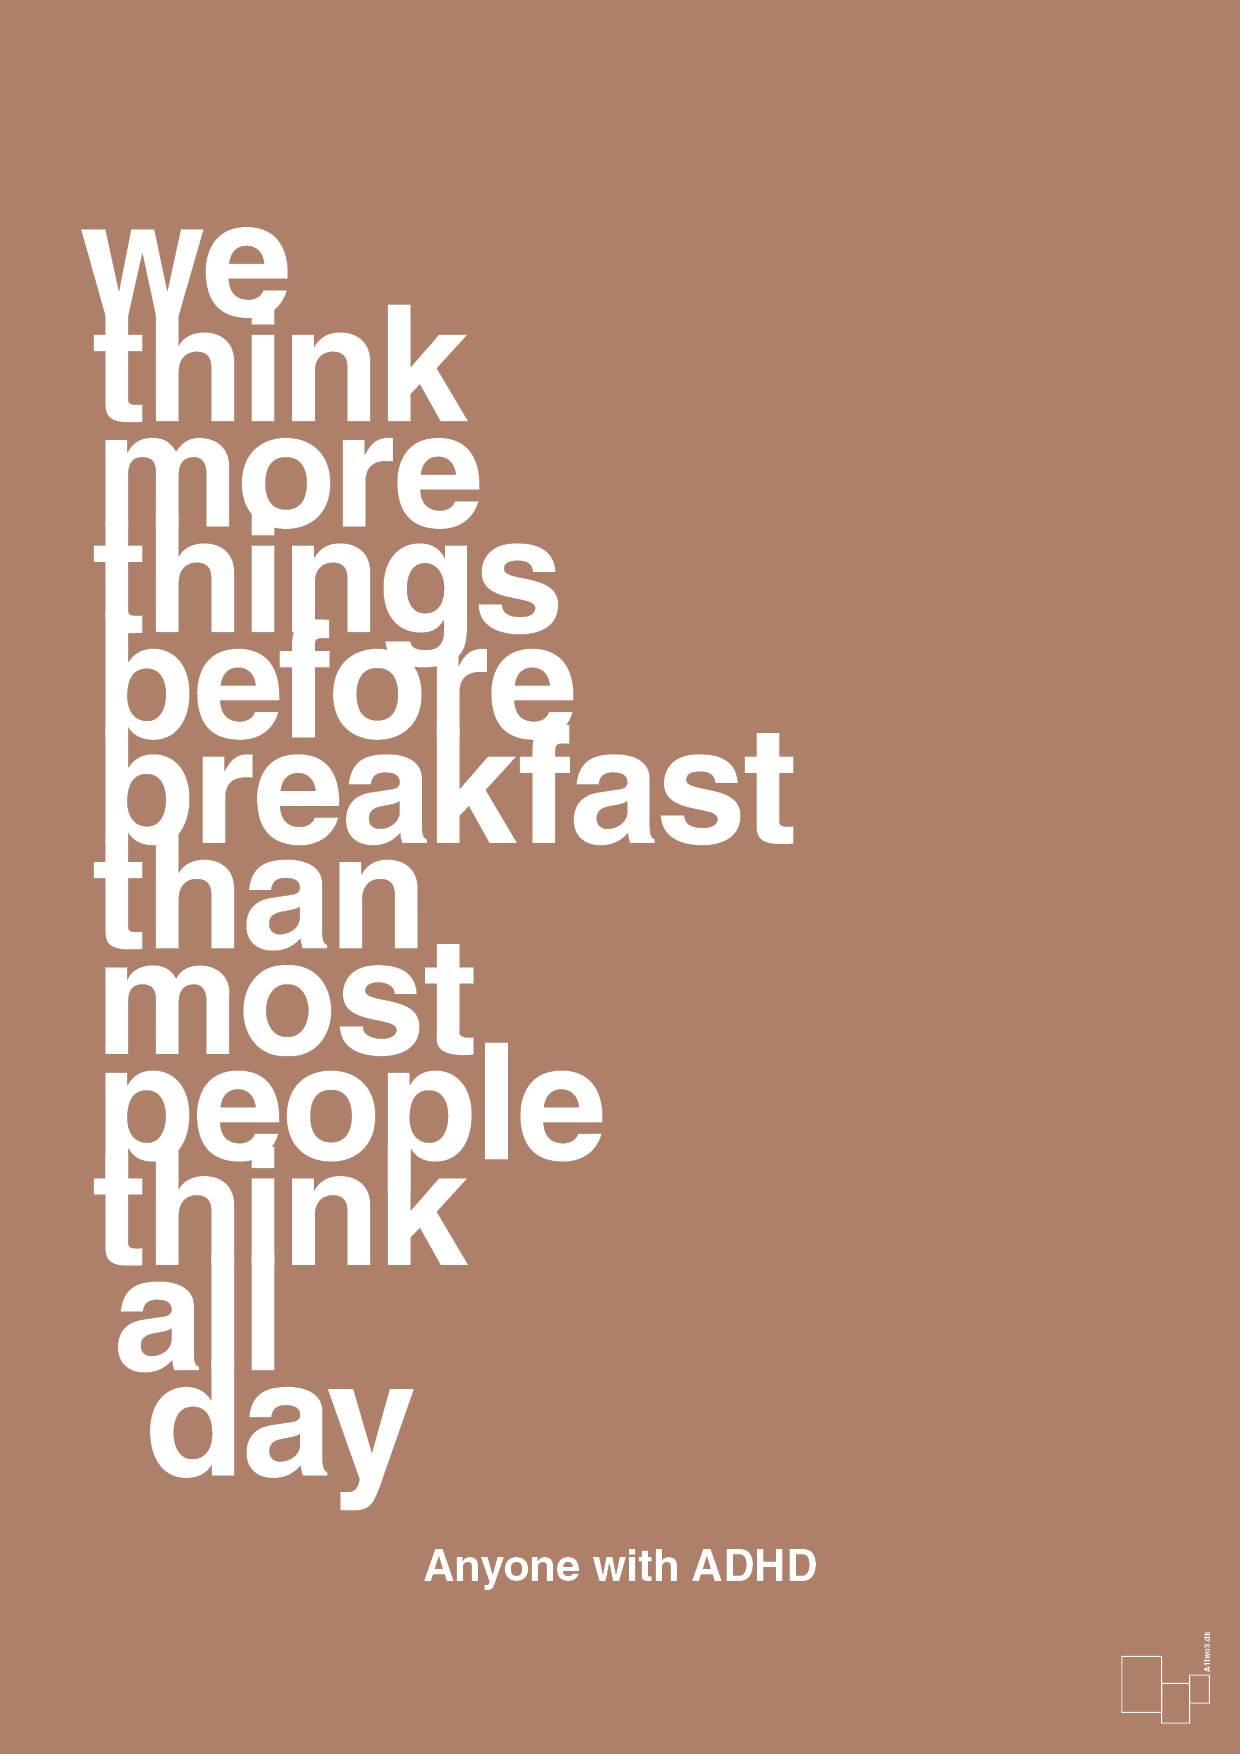 we think more things before breakfast than most people think all day - Plakat med Samfund i Cider Spice